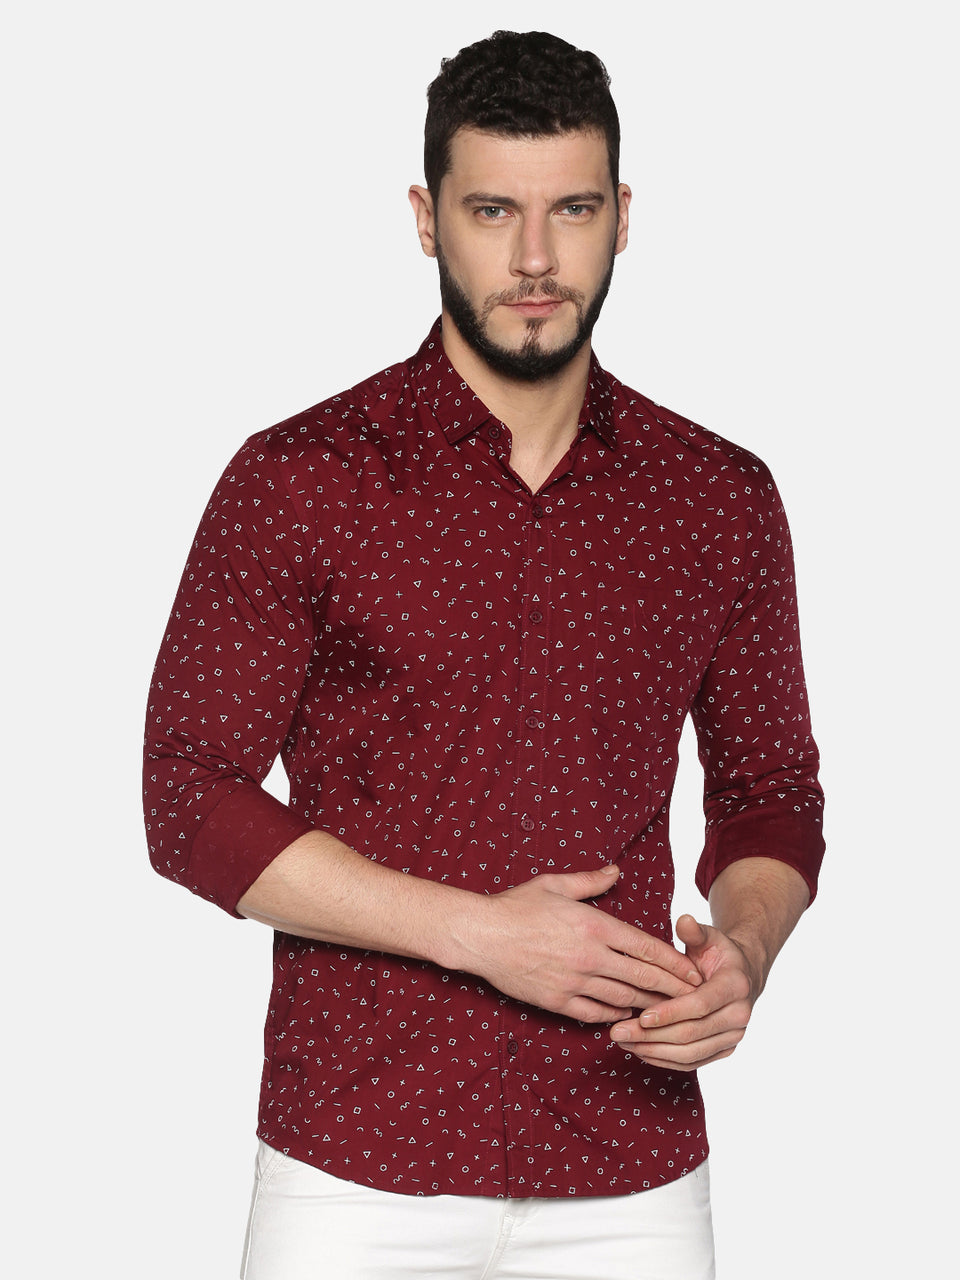 Buy Casual Shirts for Men Online in India